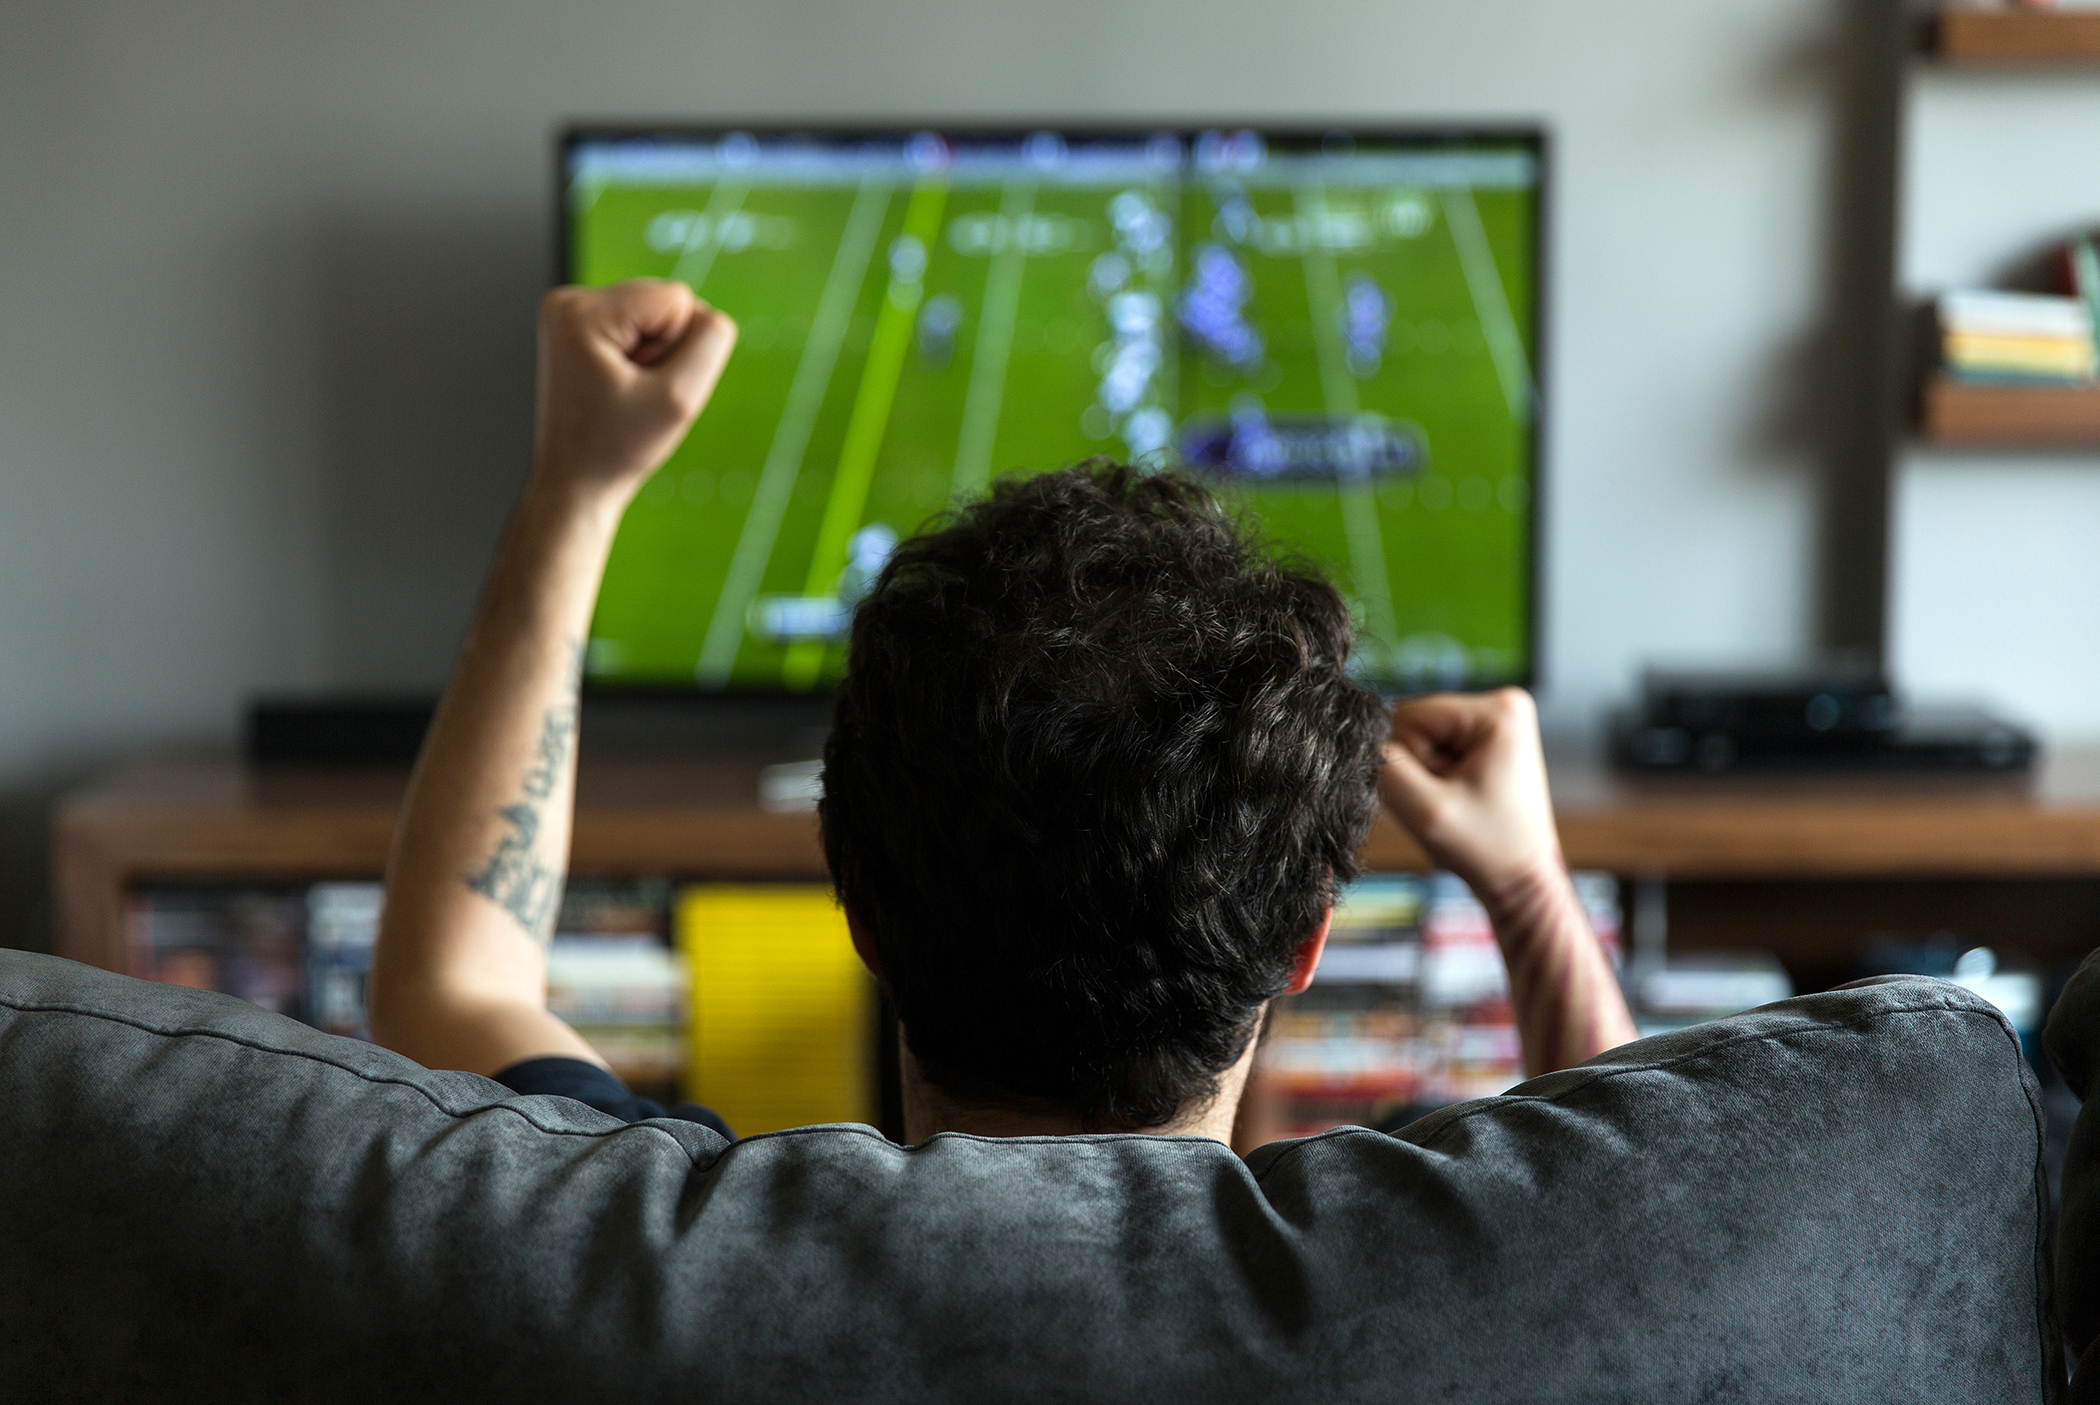 how to stream nfl football today